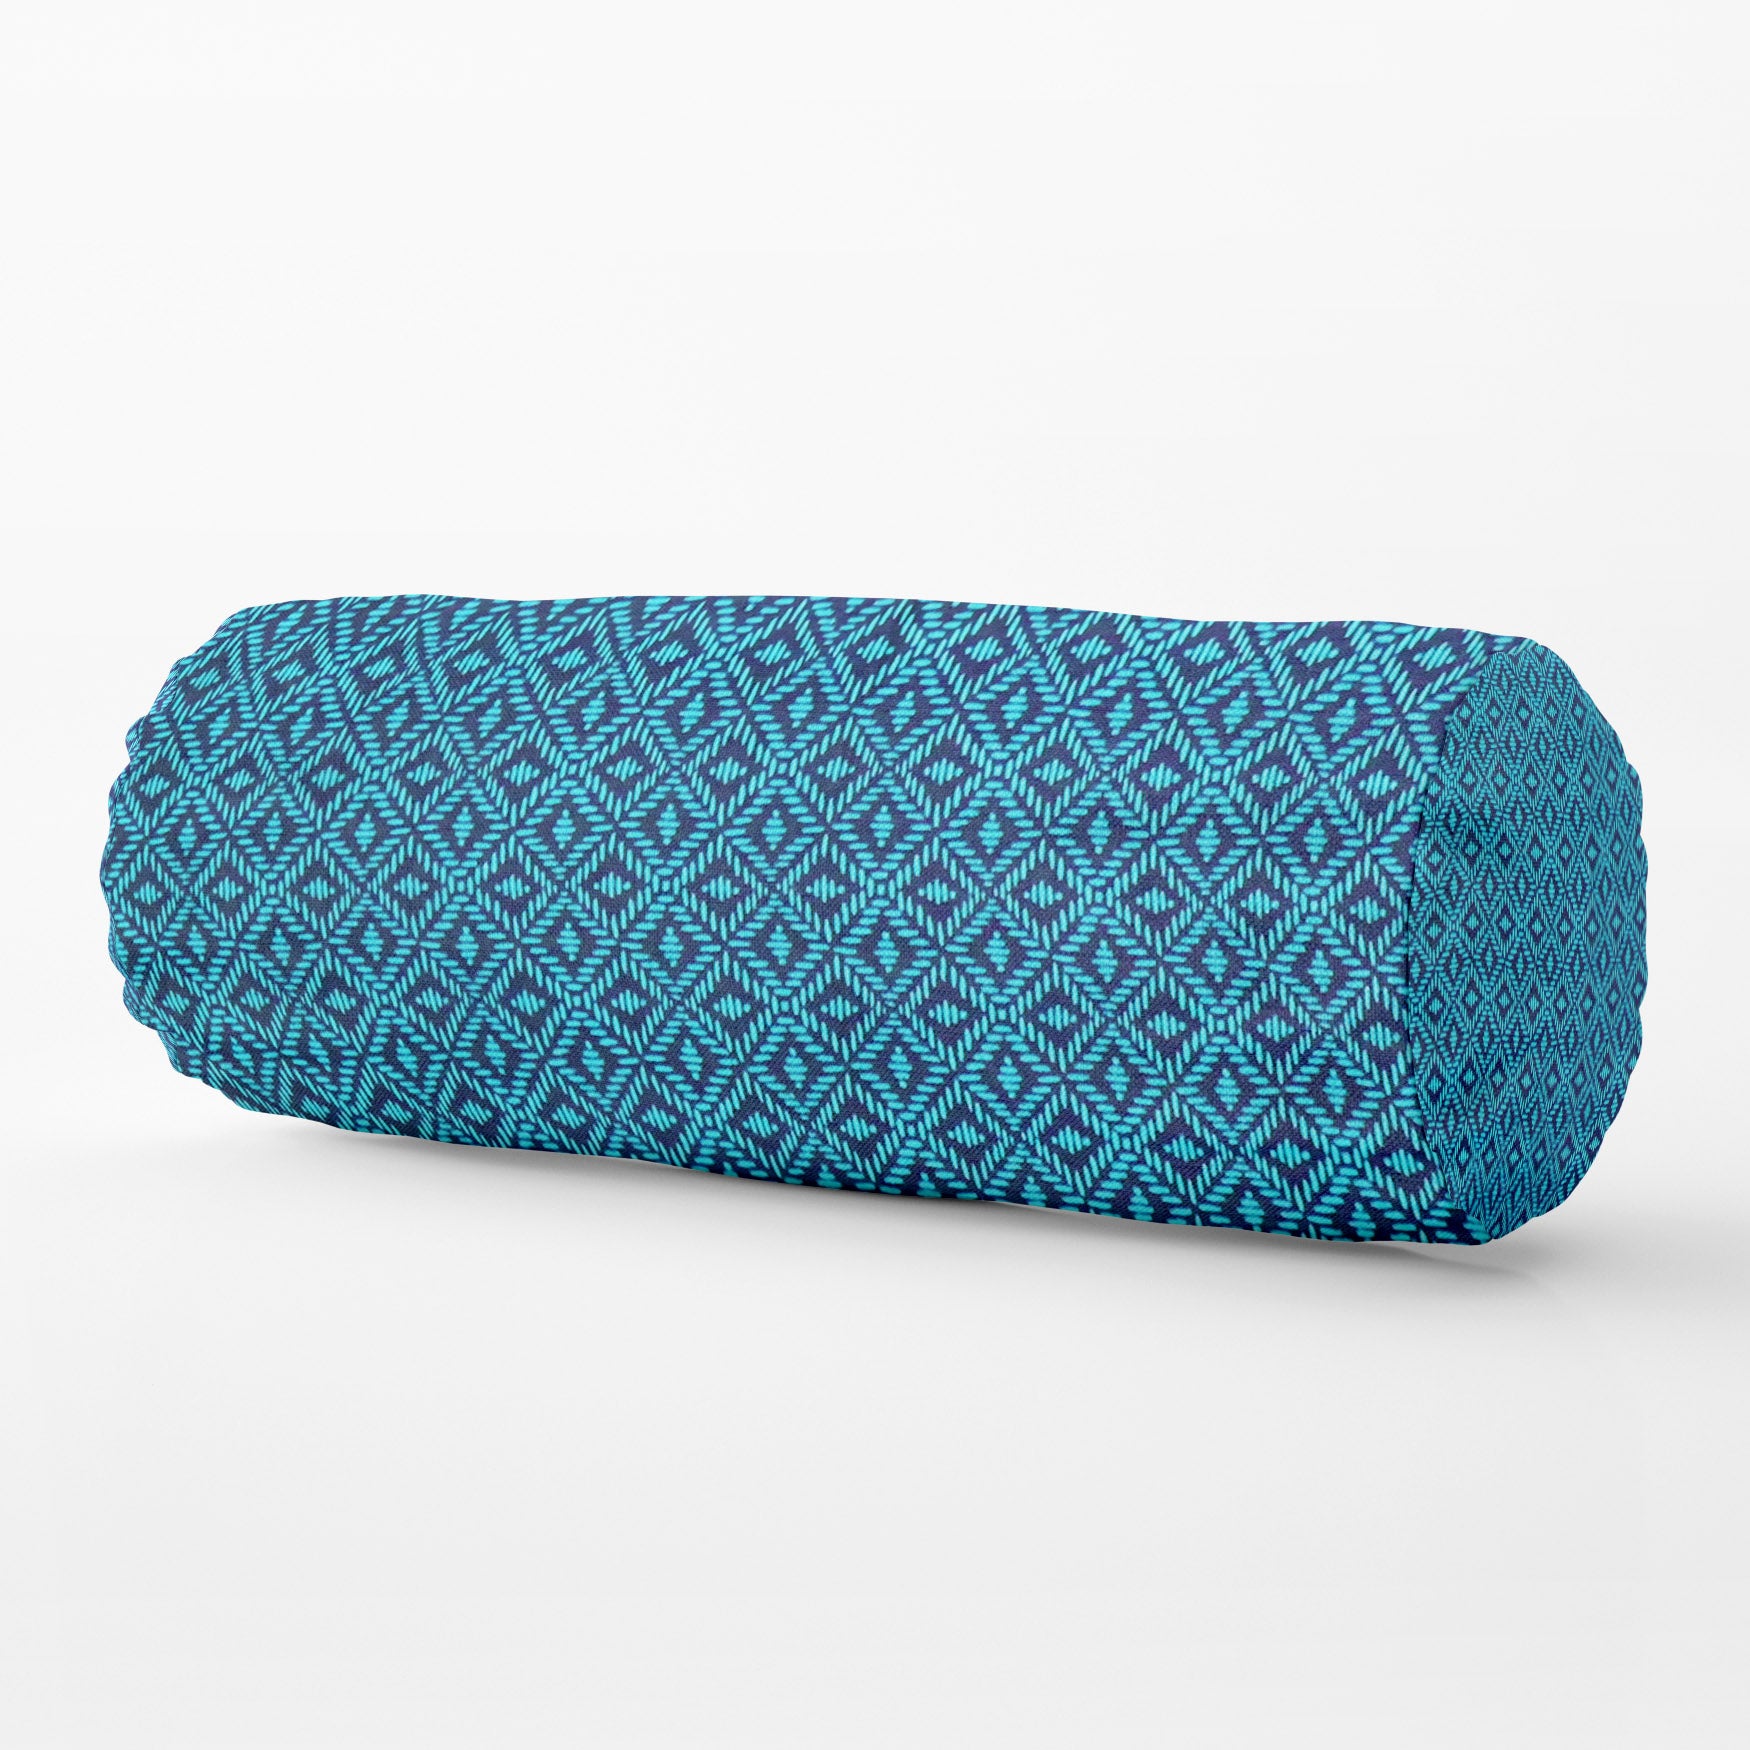 Bolster Pillows With Removable Cover - Turk Diamonte